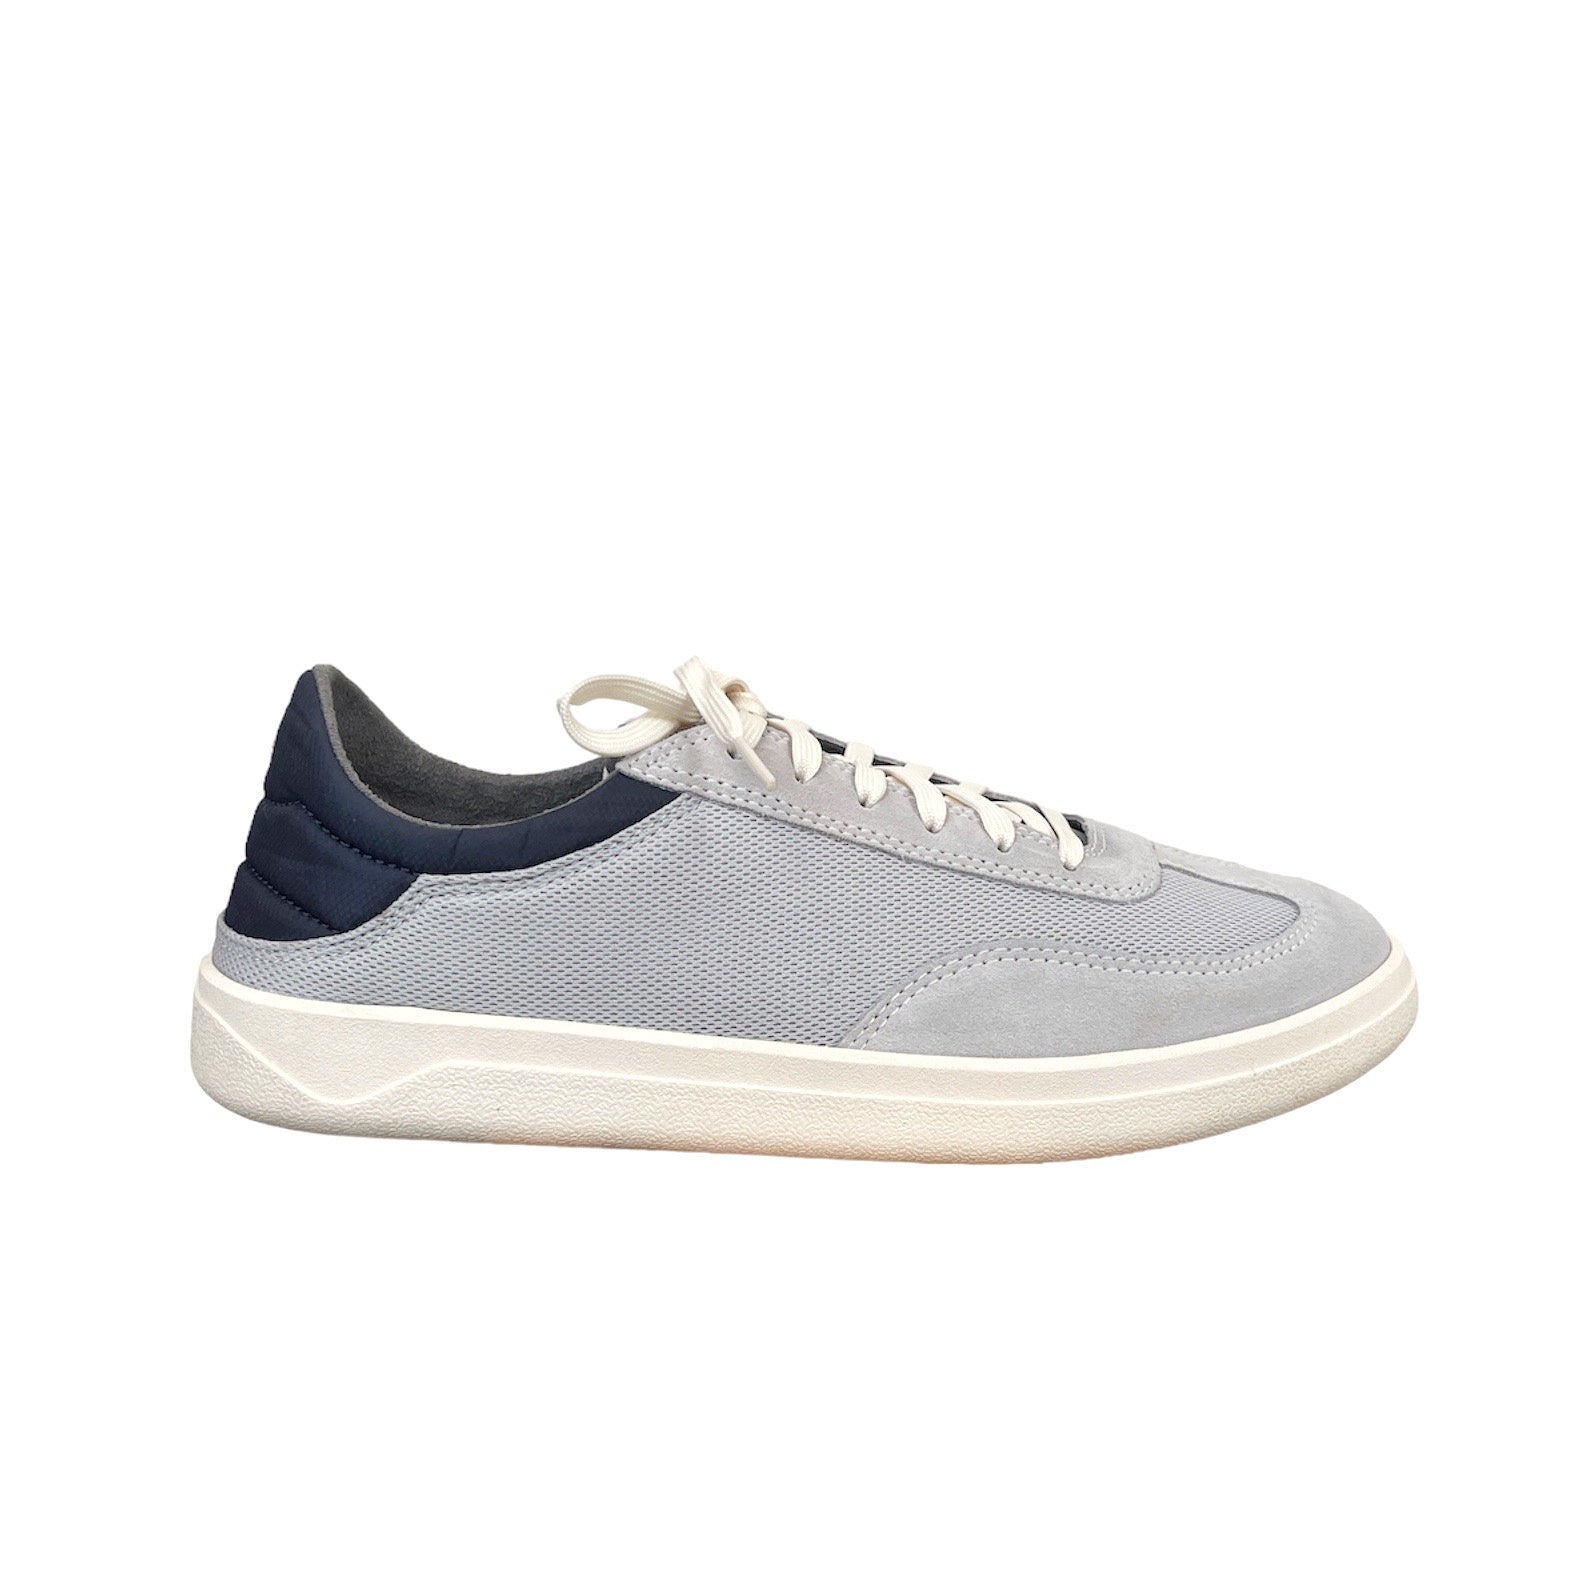 OLUKAI - PUNINI LACE UP SNEAKER IN VAPOR/TRENCH BLUE TEXTILE